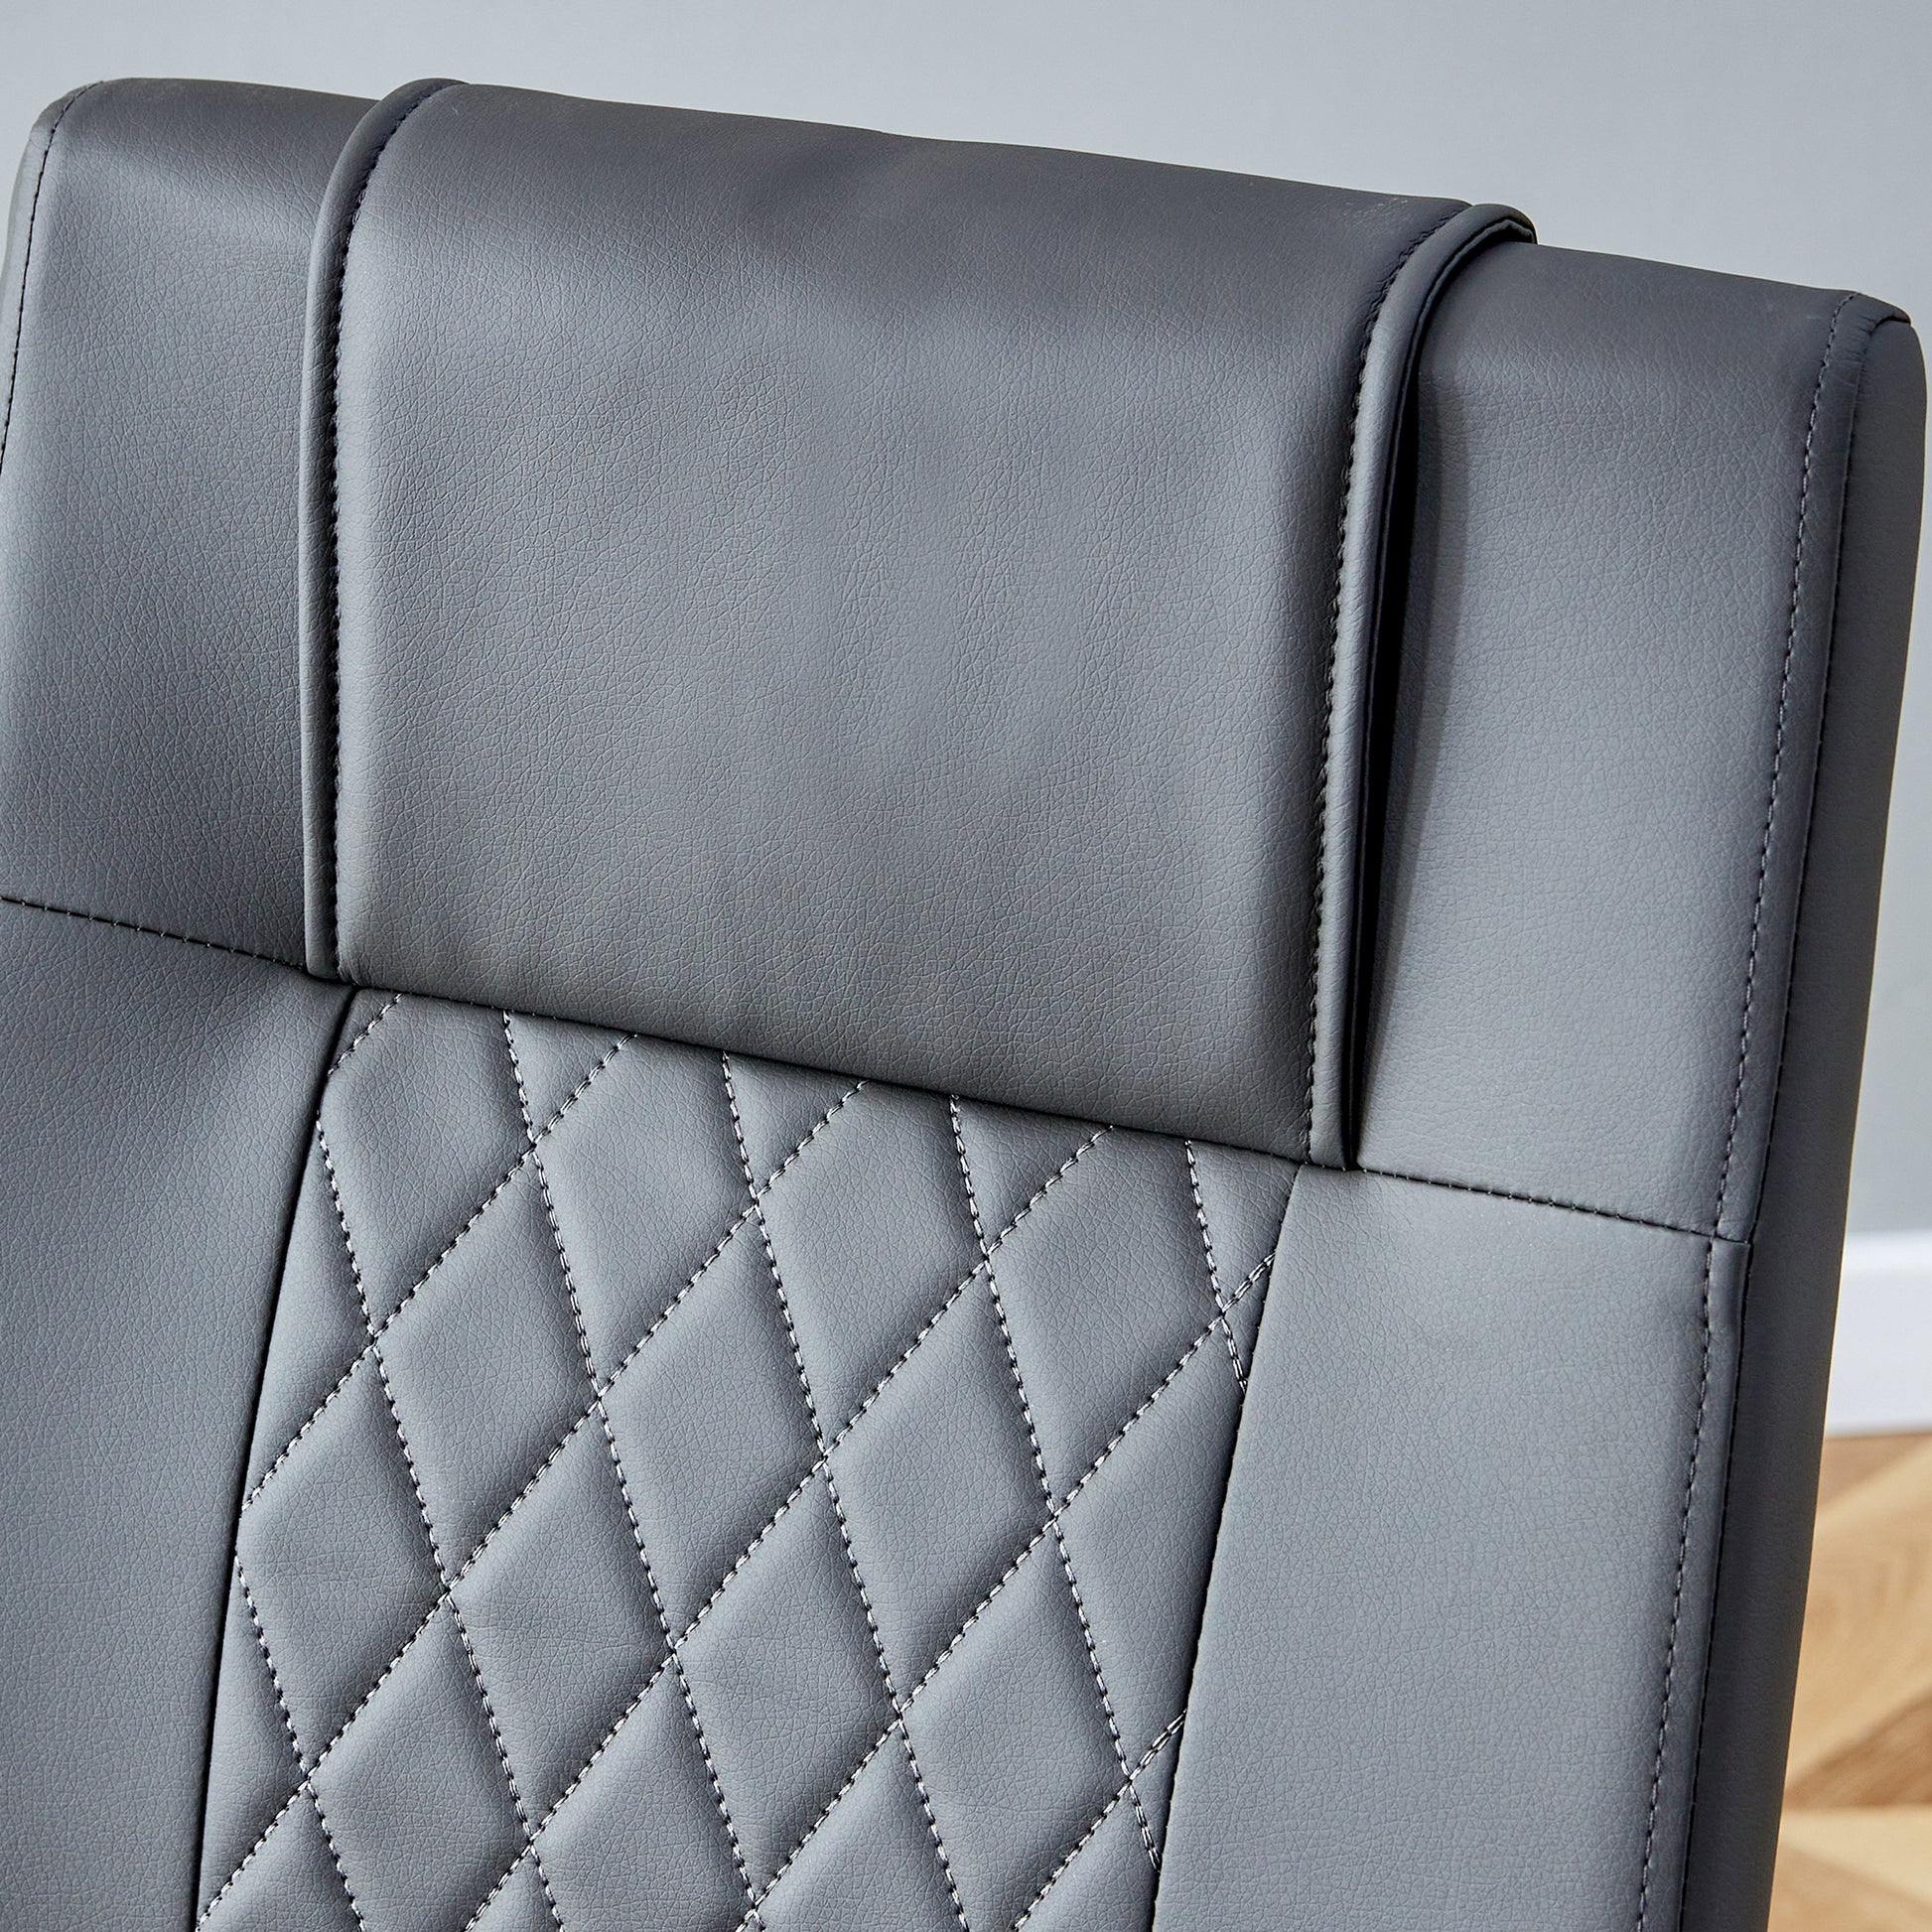 Modern Dining Chair With Faux Leather Cushioned